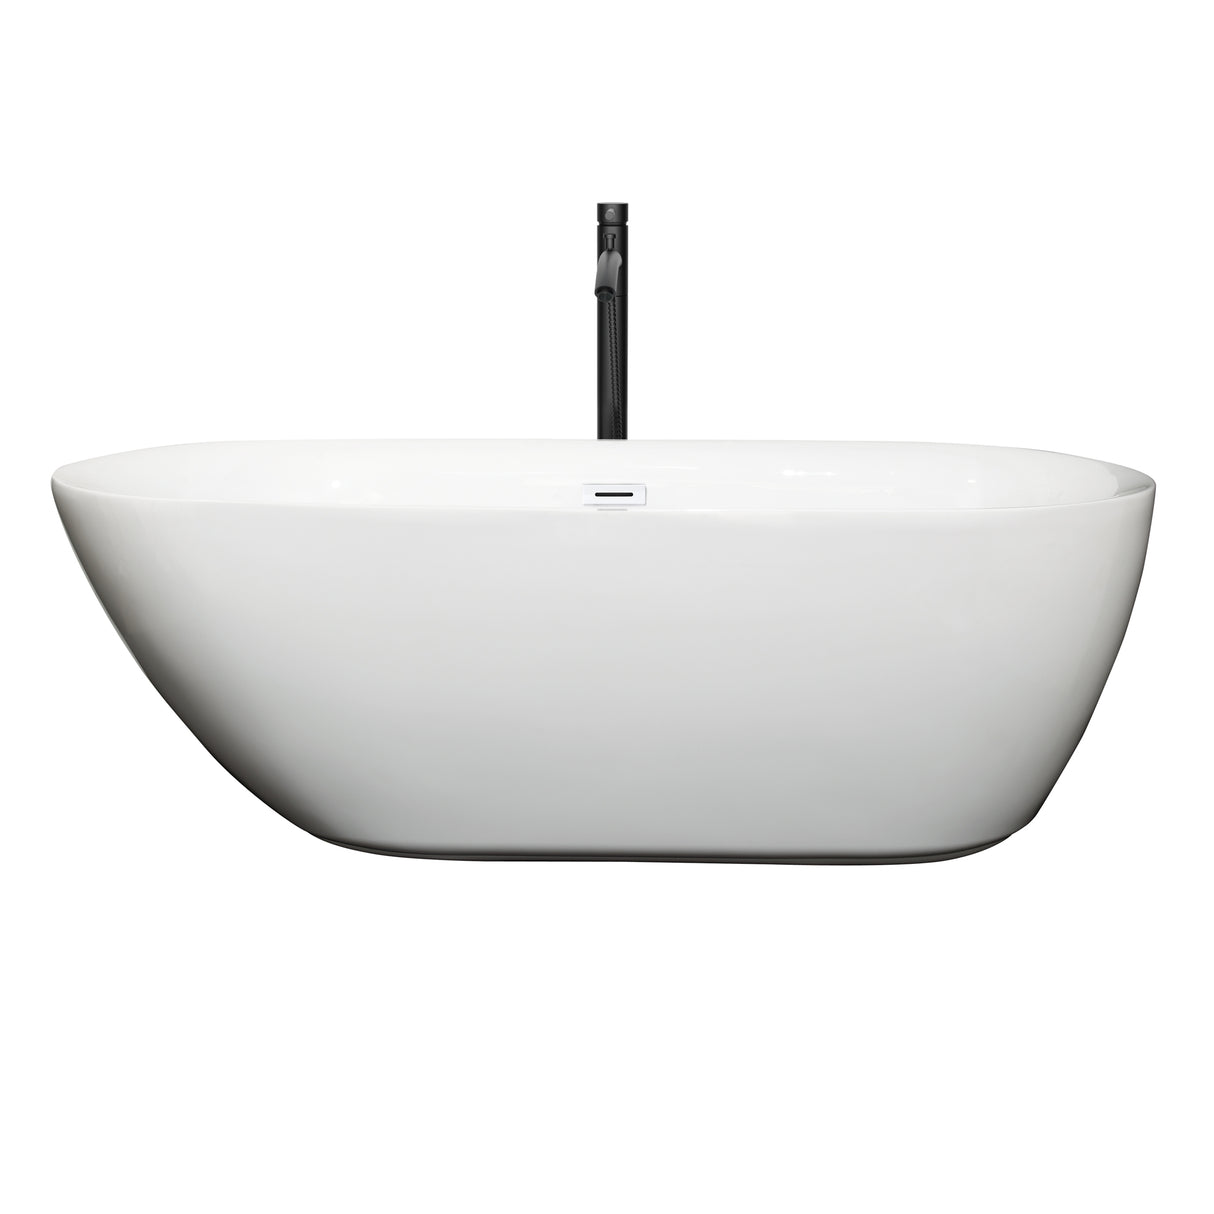 Melissa 65 Inch Freestanding Bathtub in White with Shiny White Trim and Floor Mounted Faucet in Matte Black